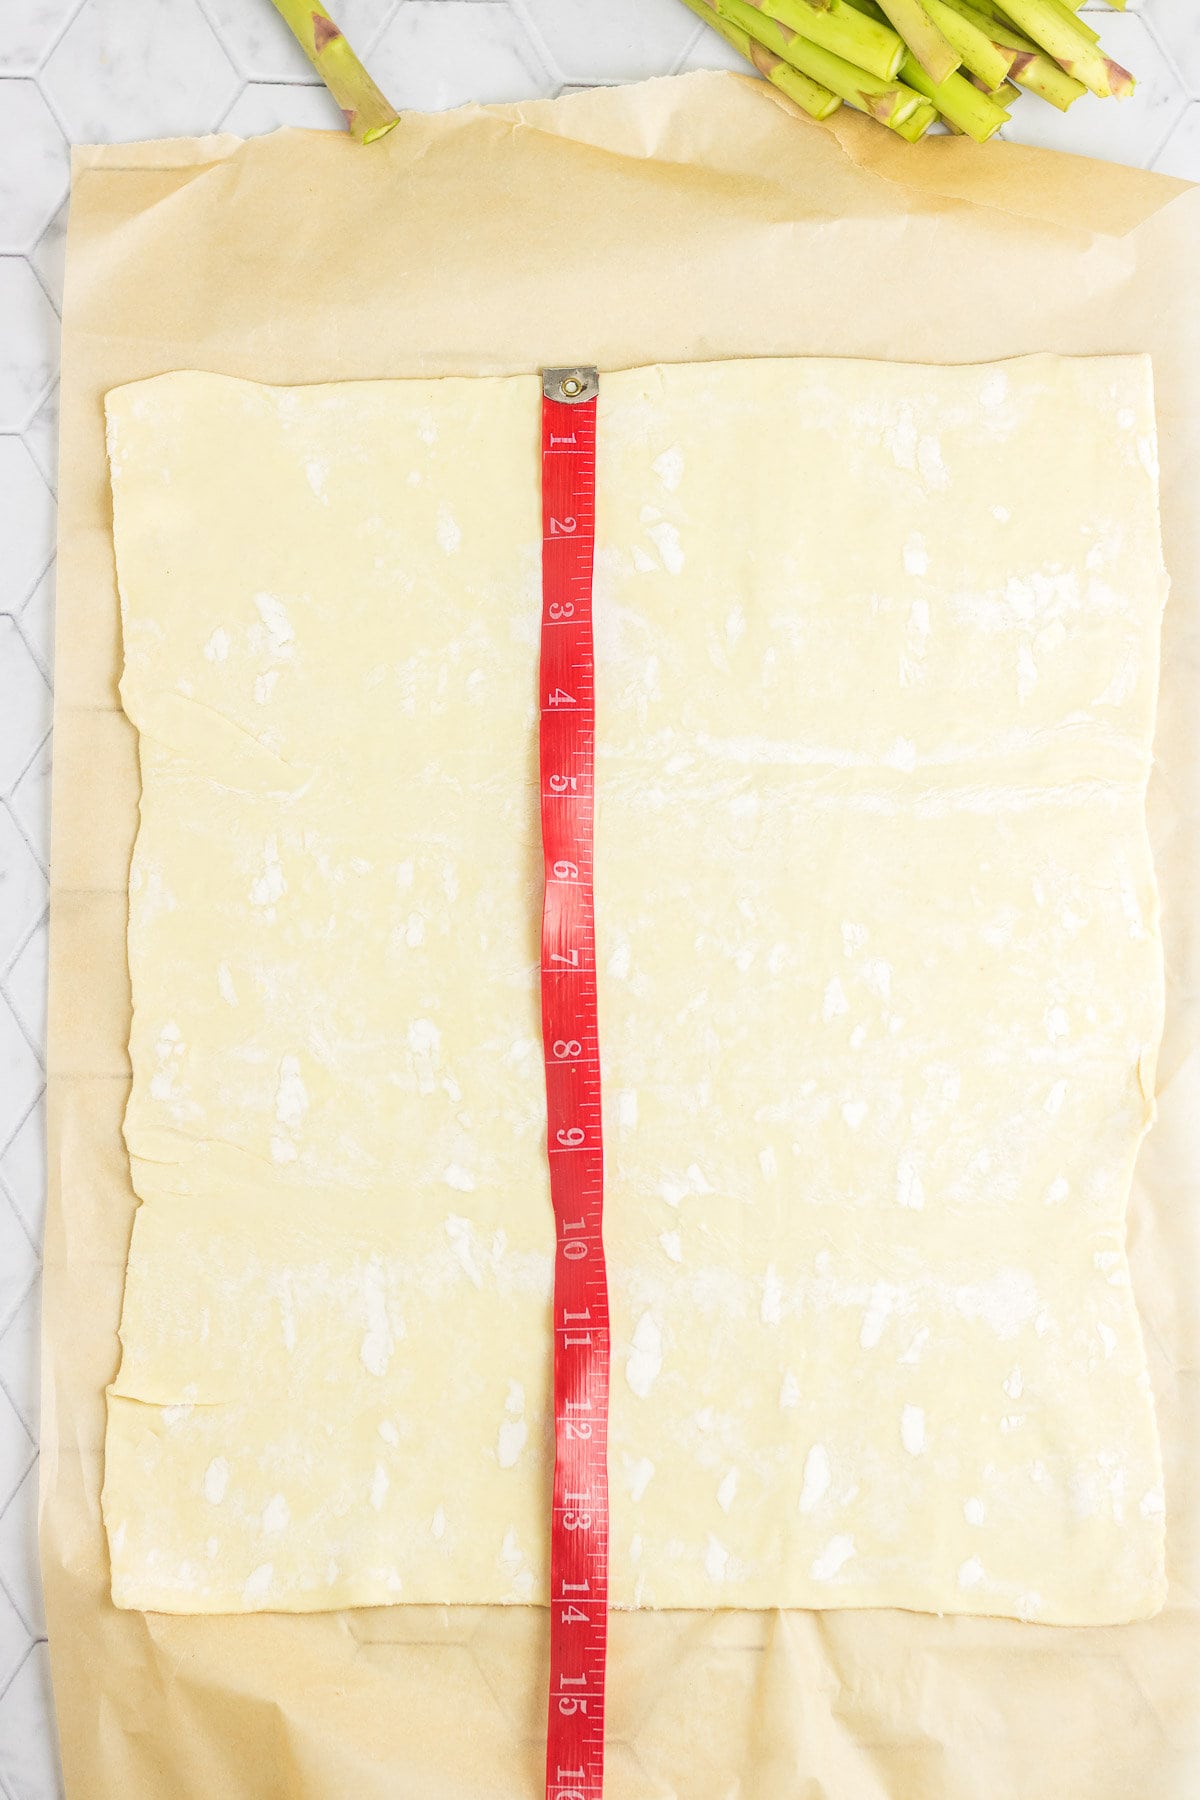 Rolled out puff pastry on parchment paper.